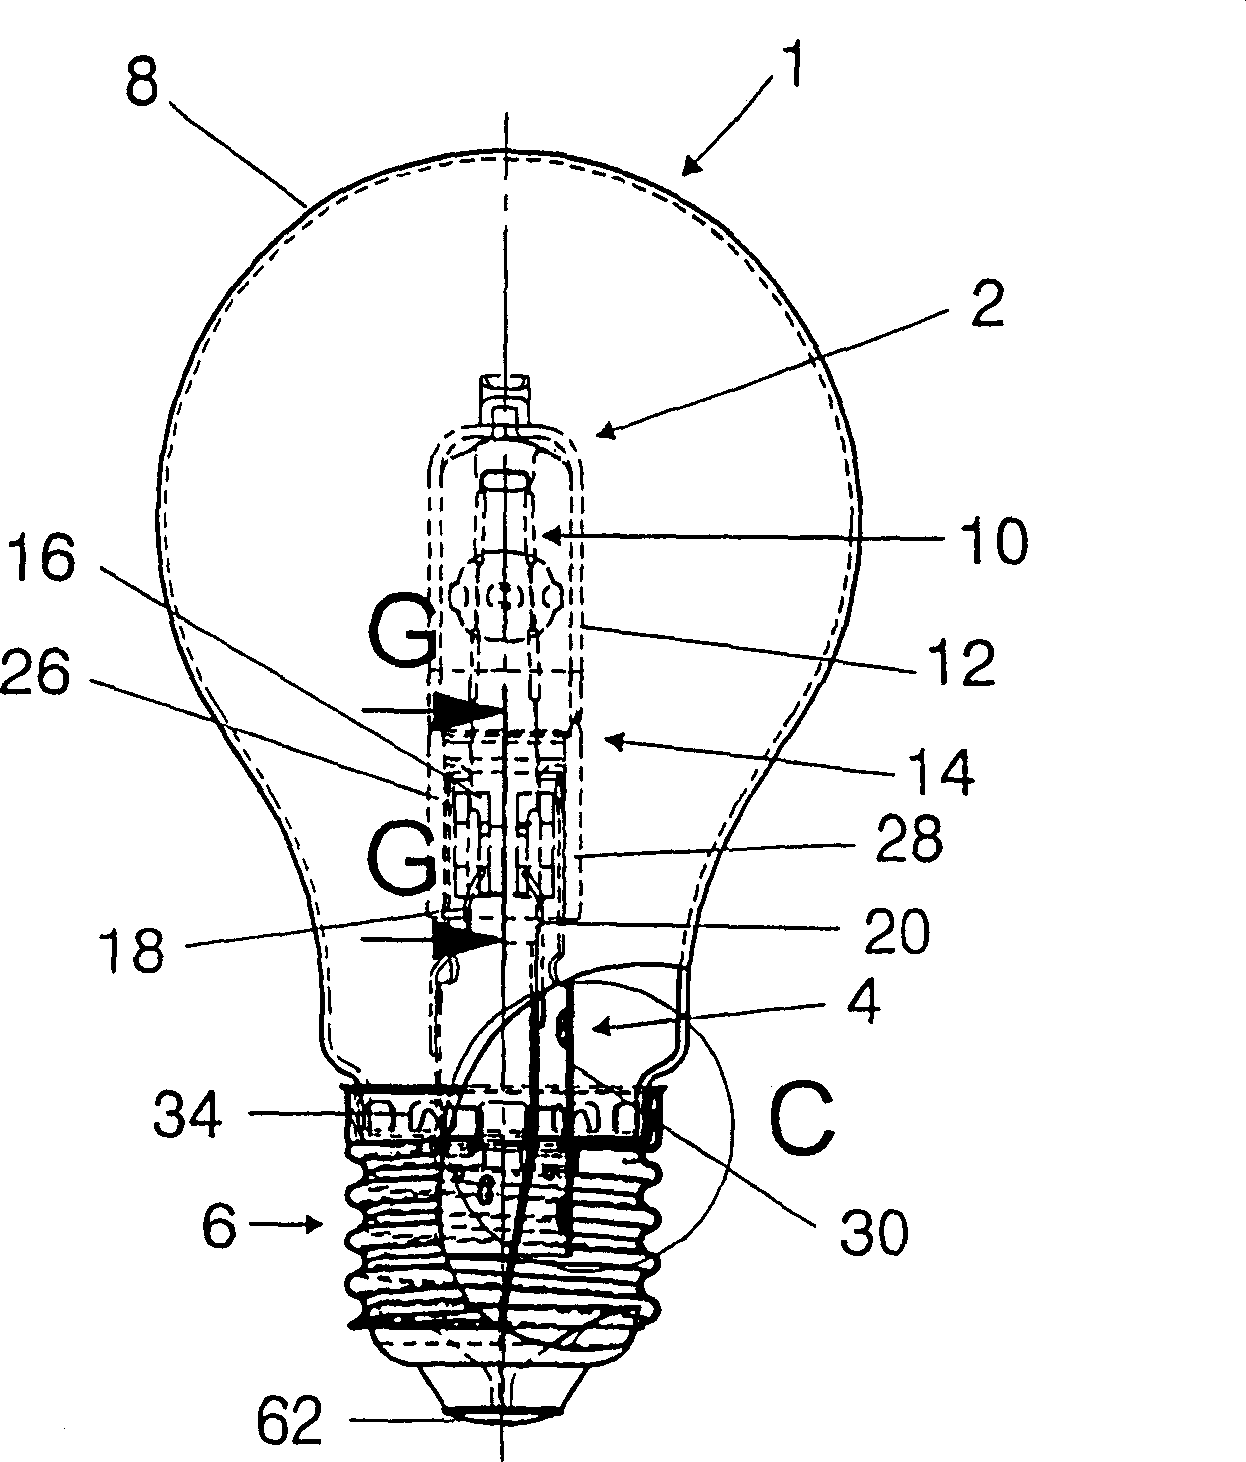 Bulb with built-in bulb